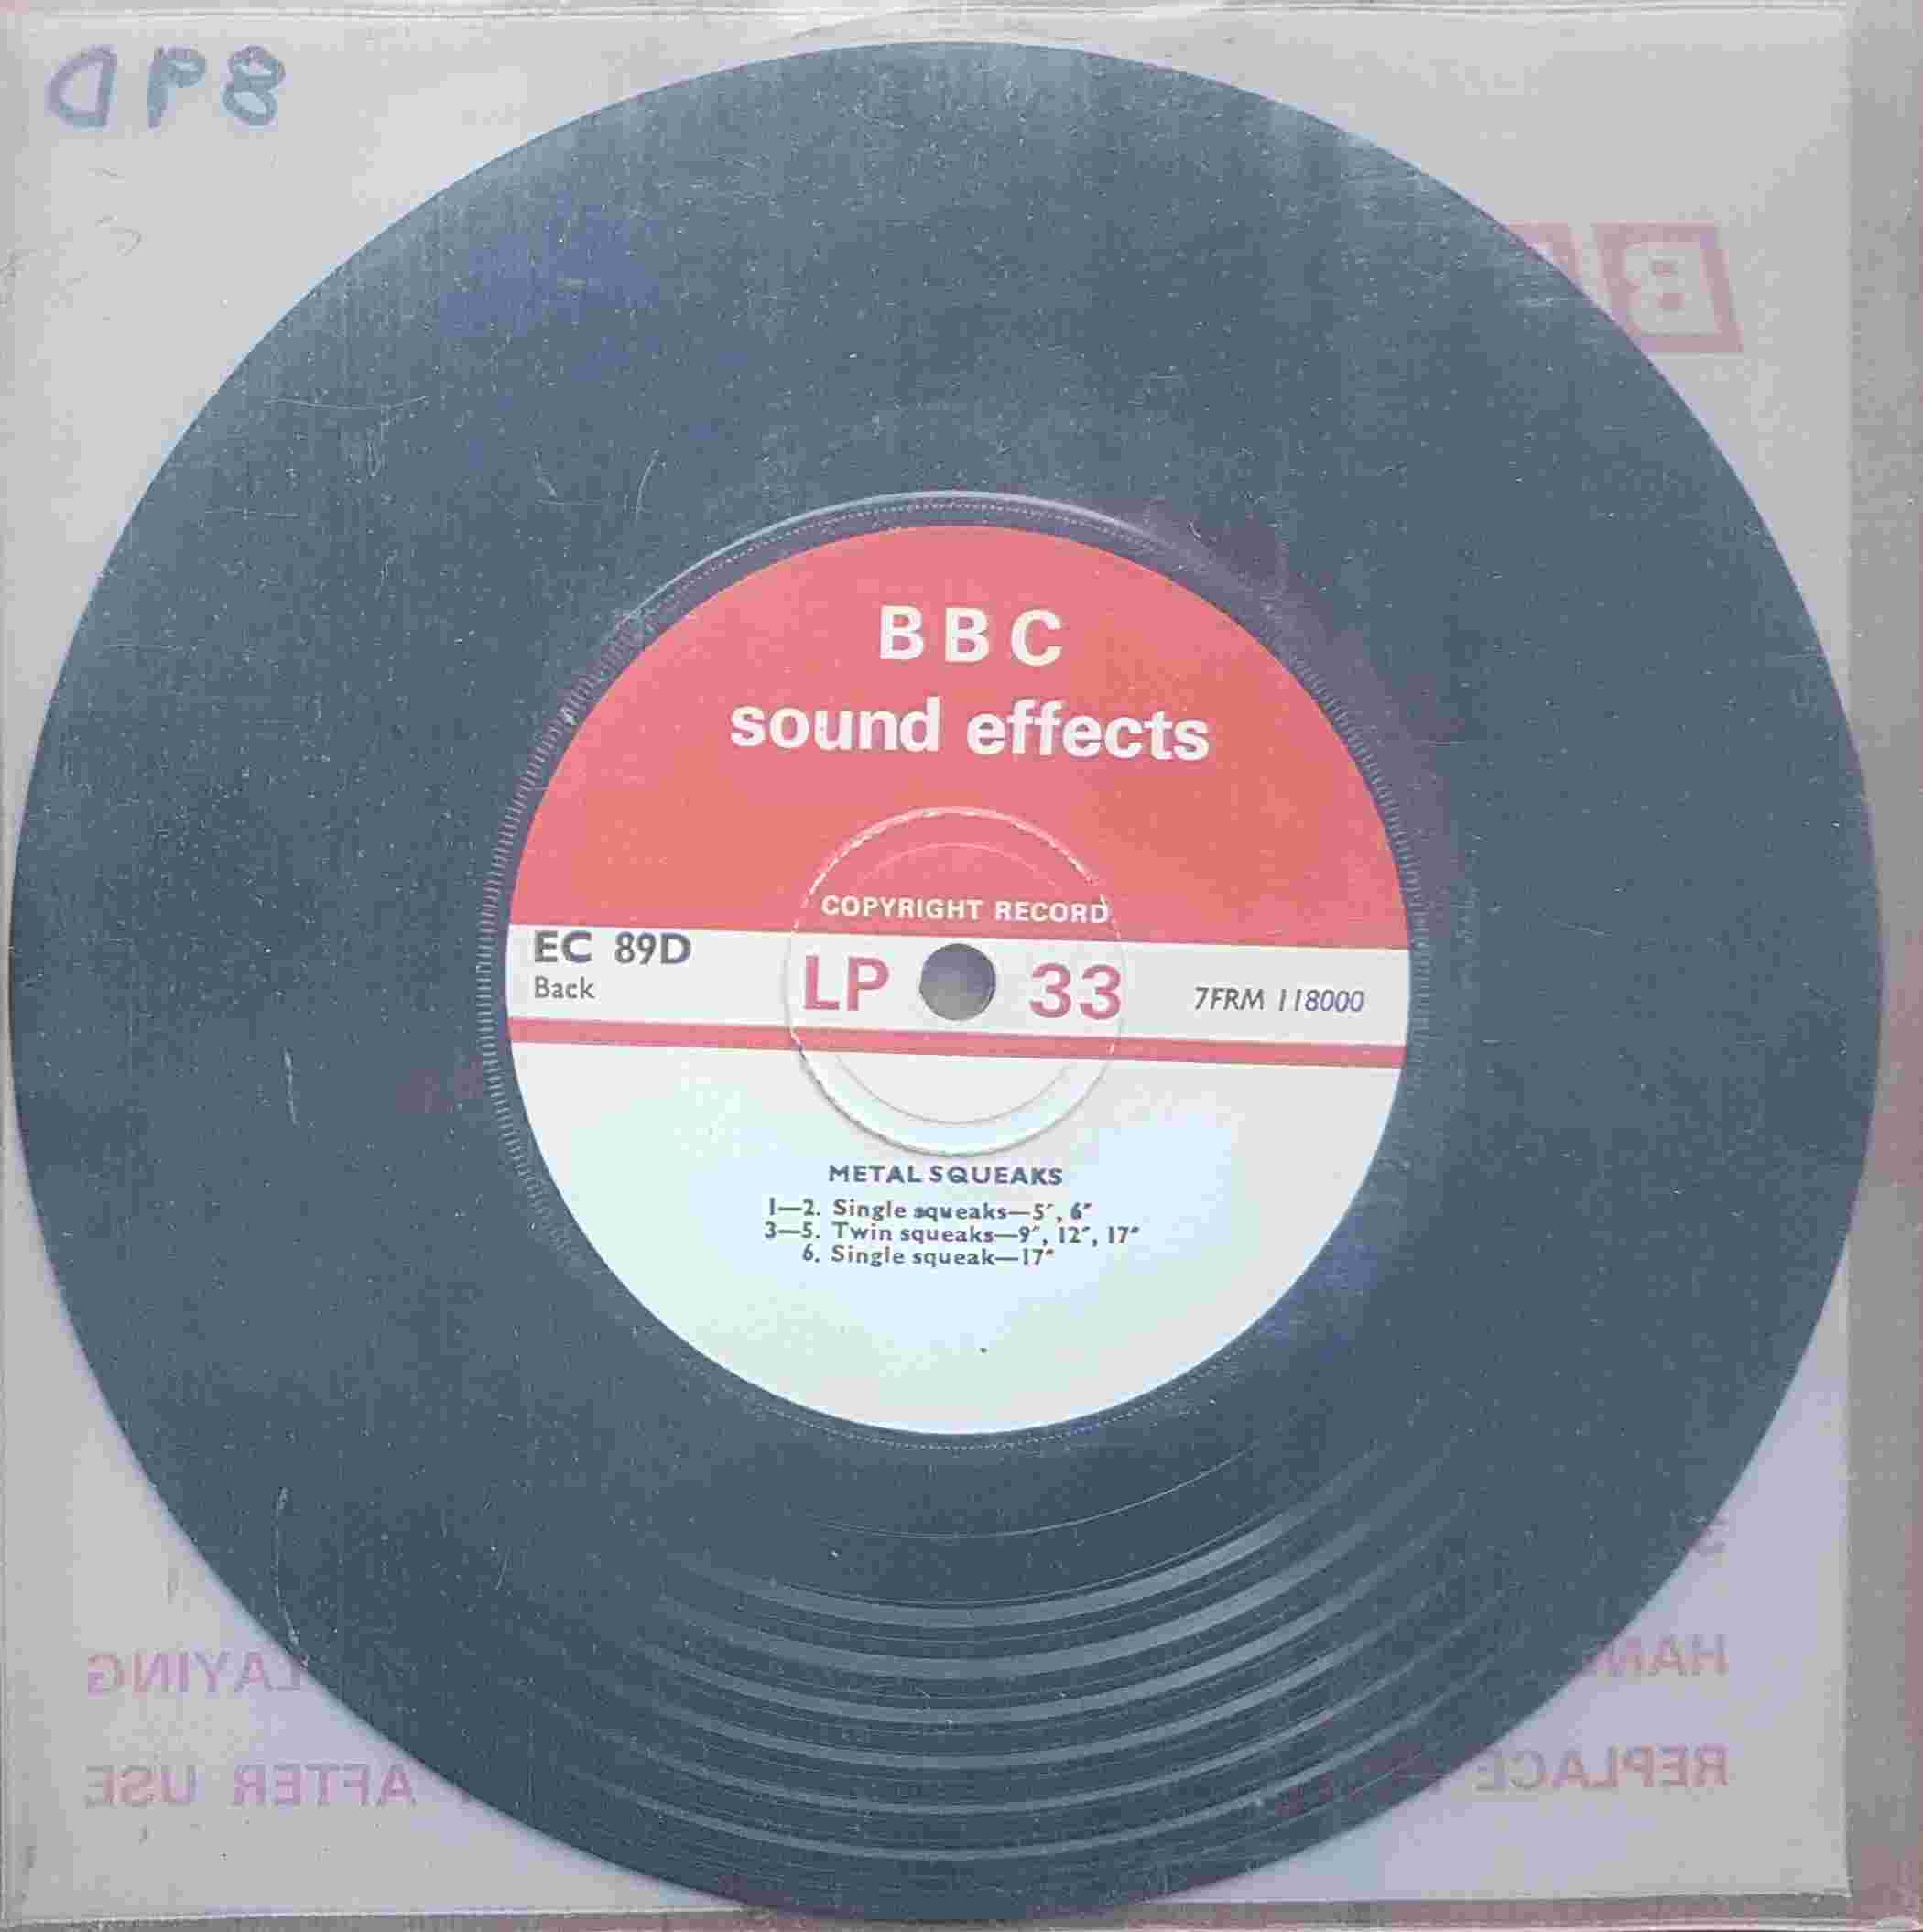 Picture of EC 89D Metal squeaks by artist Not registered from the BBC records and Tapes library